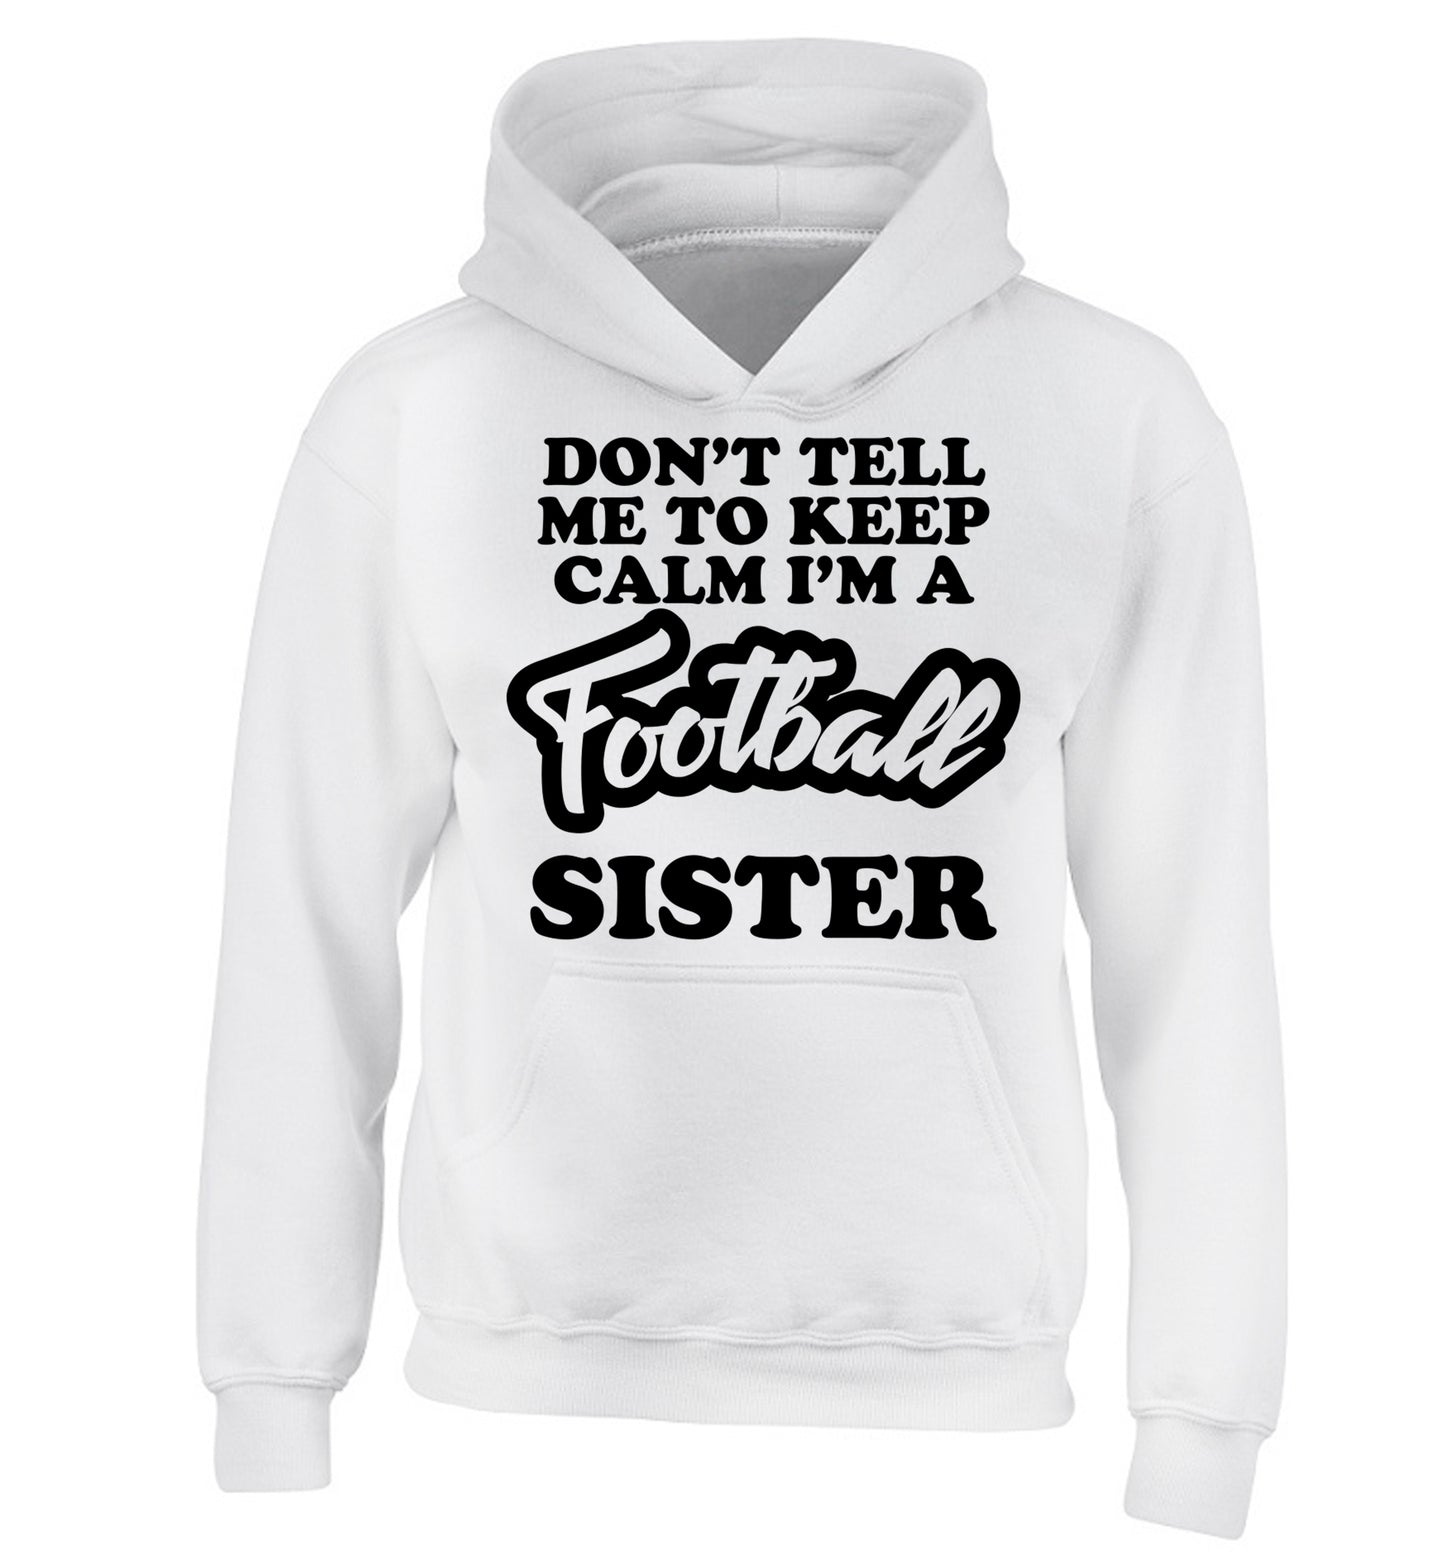 Don't tell me to keep calm I'm a football sister children's white hoodie 12-14 Years